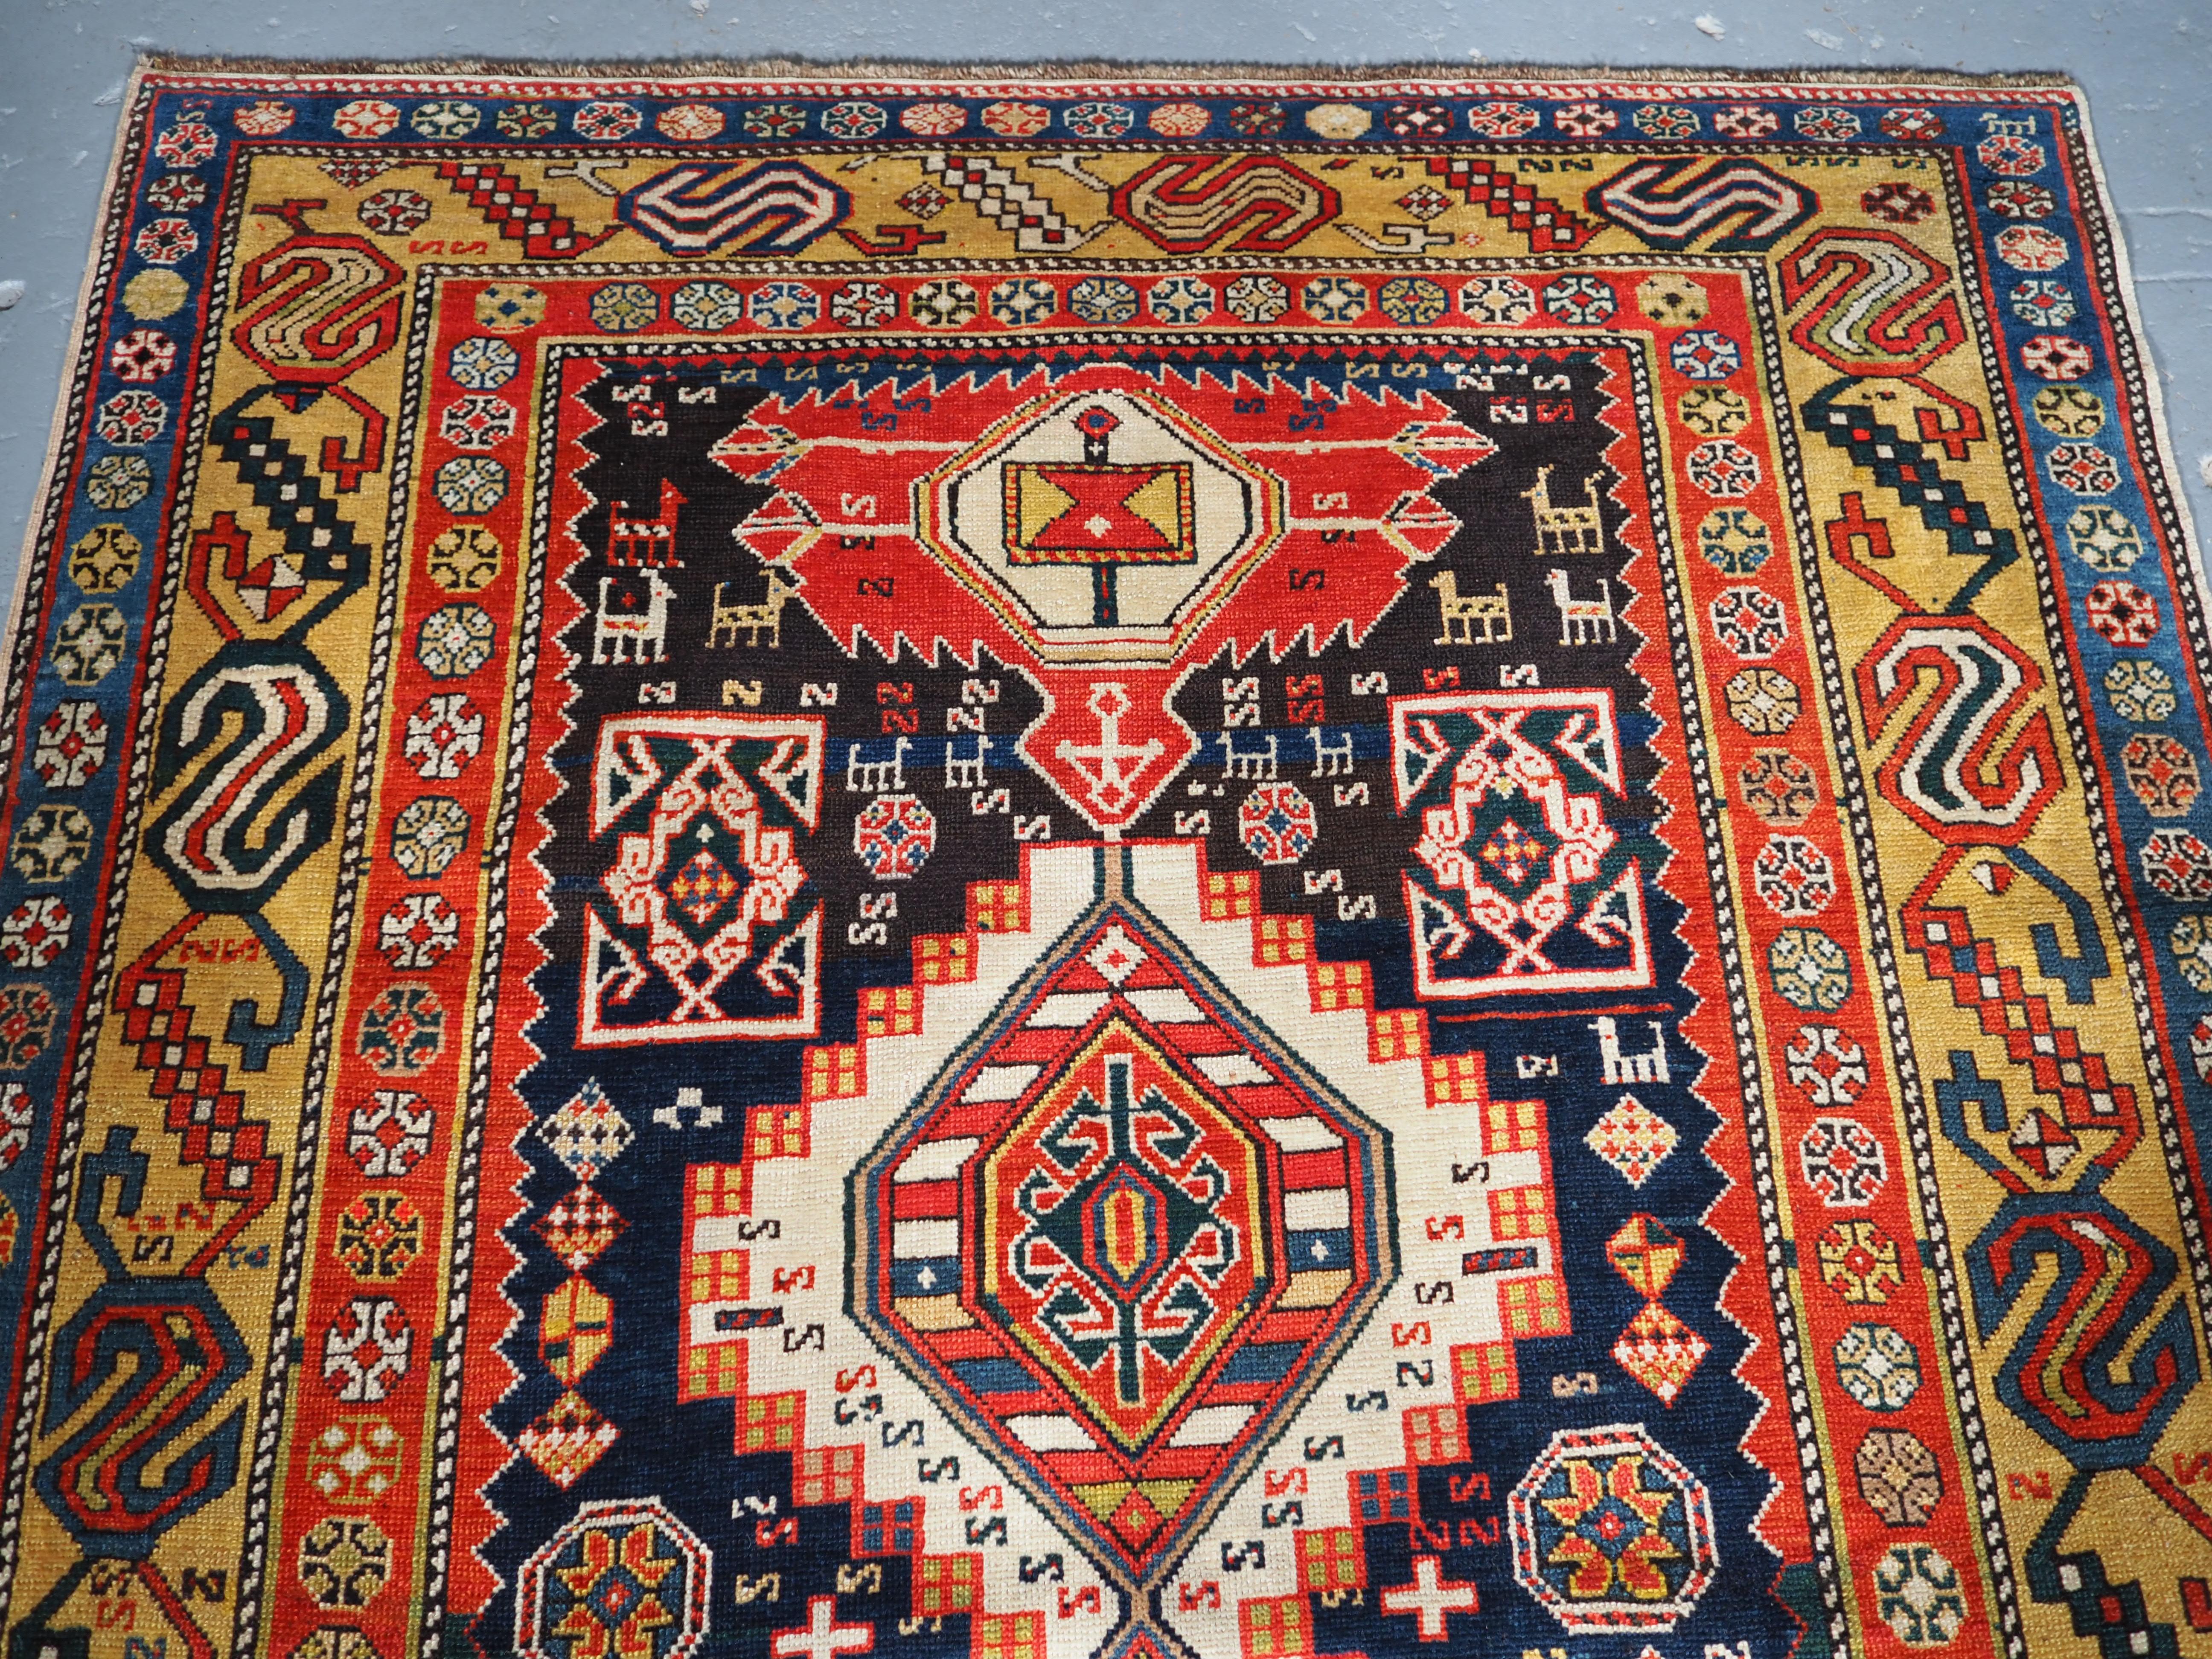 A very good Shirvan rug with the field filled with a single row of four large linked medallions, with the flattened floral design at the ends. This example has outstanding colour and the dark indigo blue field is covered with Caucasian design